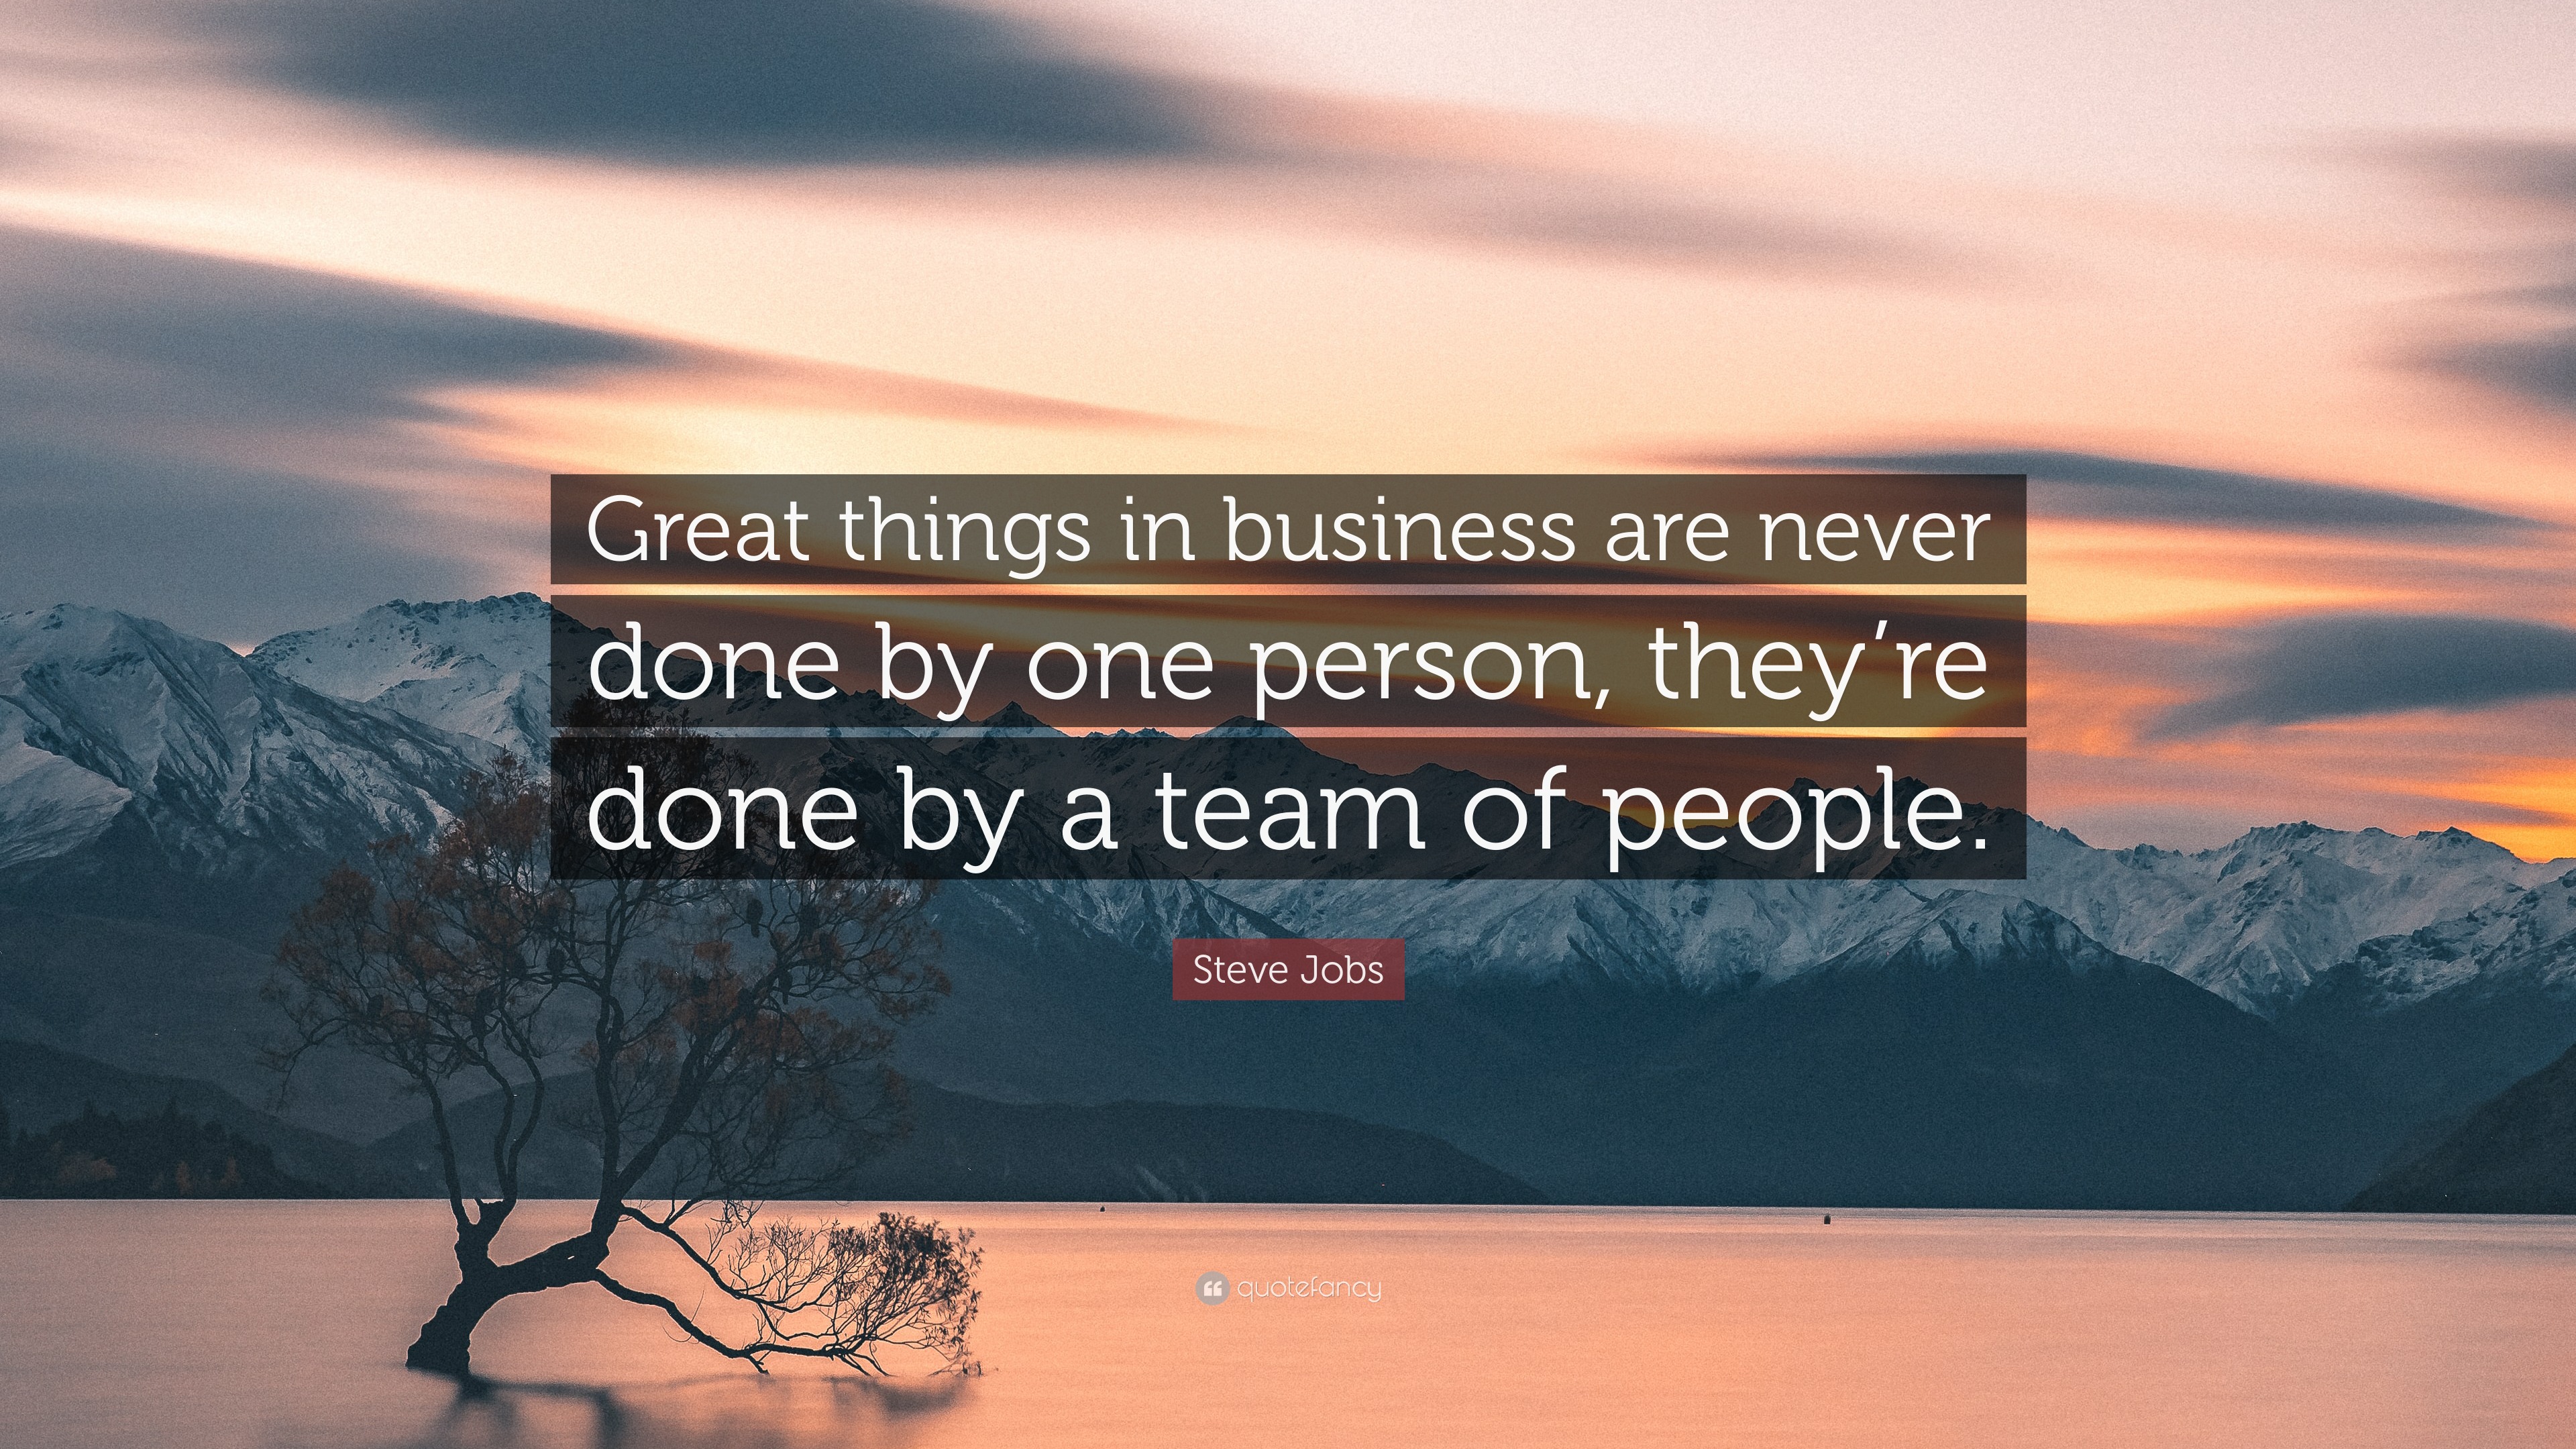 Steve Jobs Quote: “Great things in business are never done by one ...